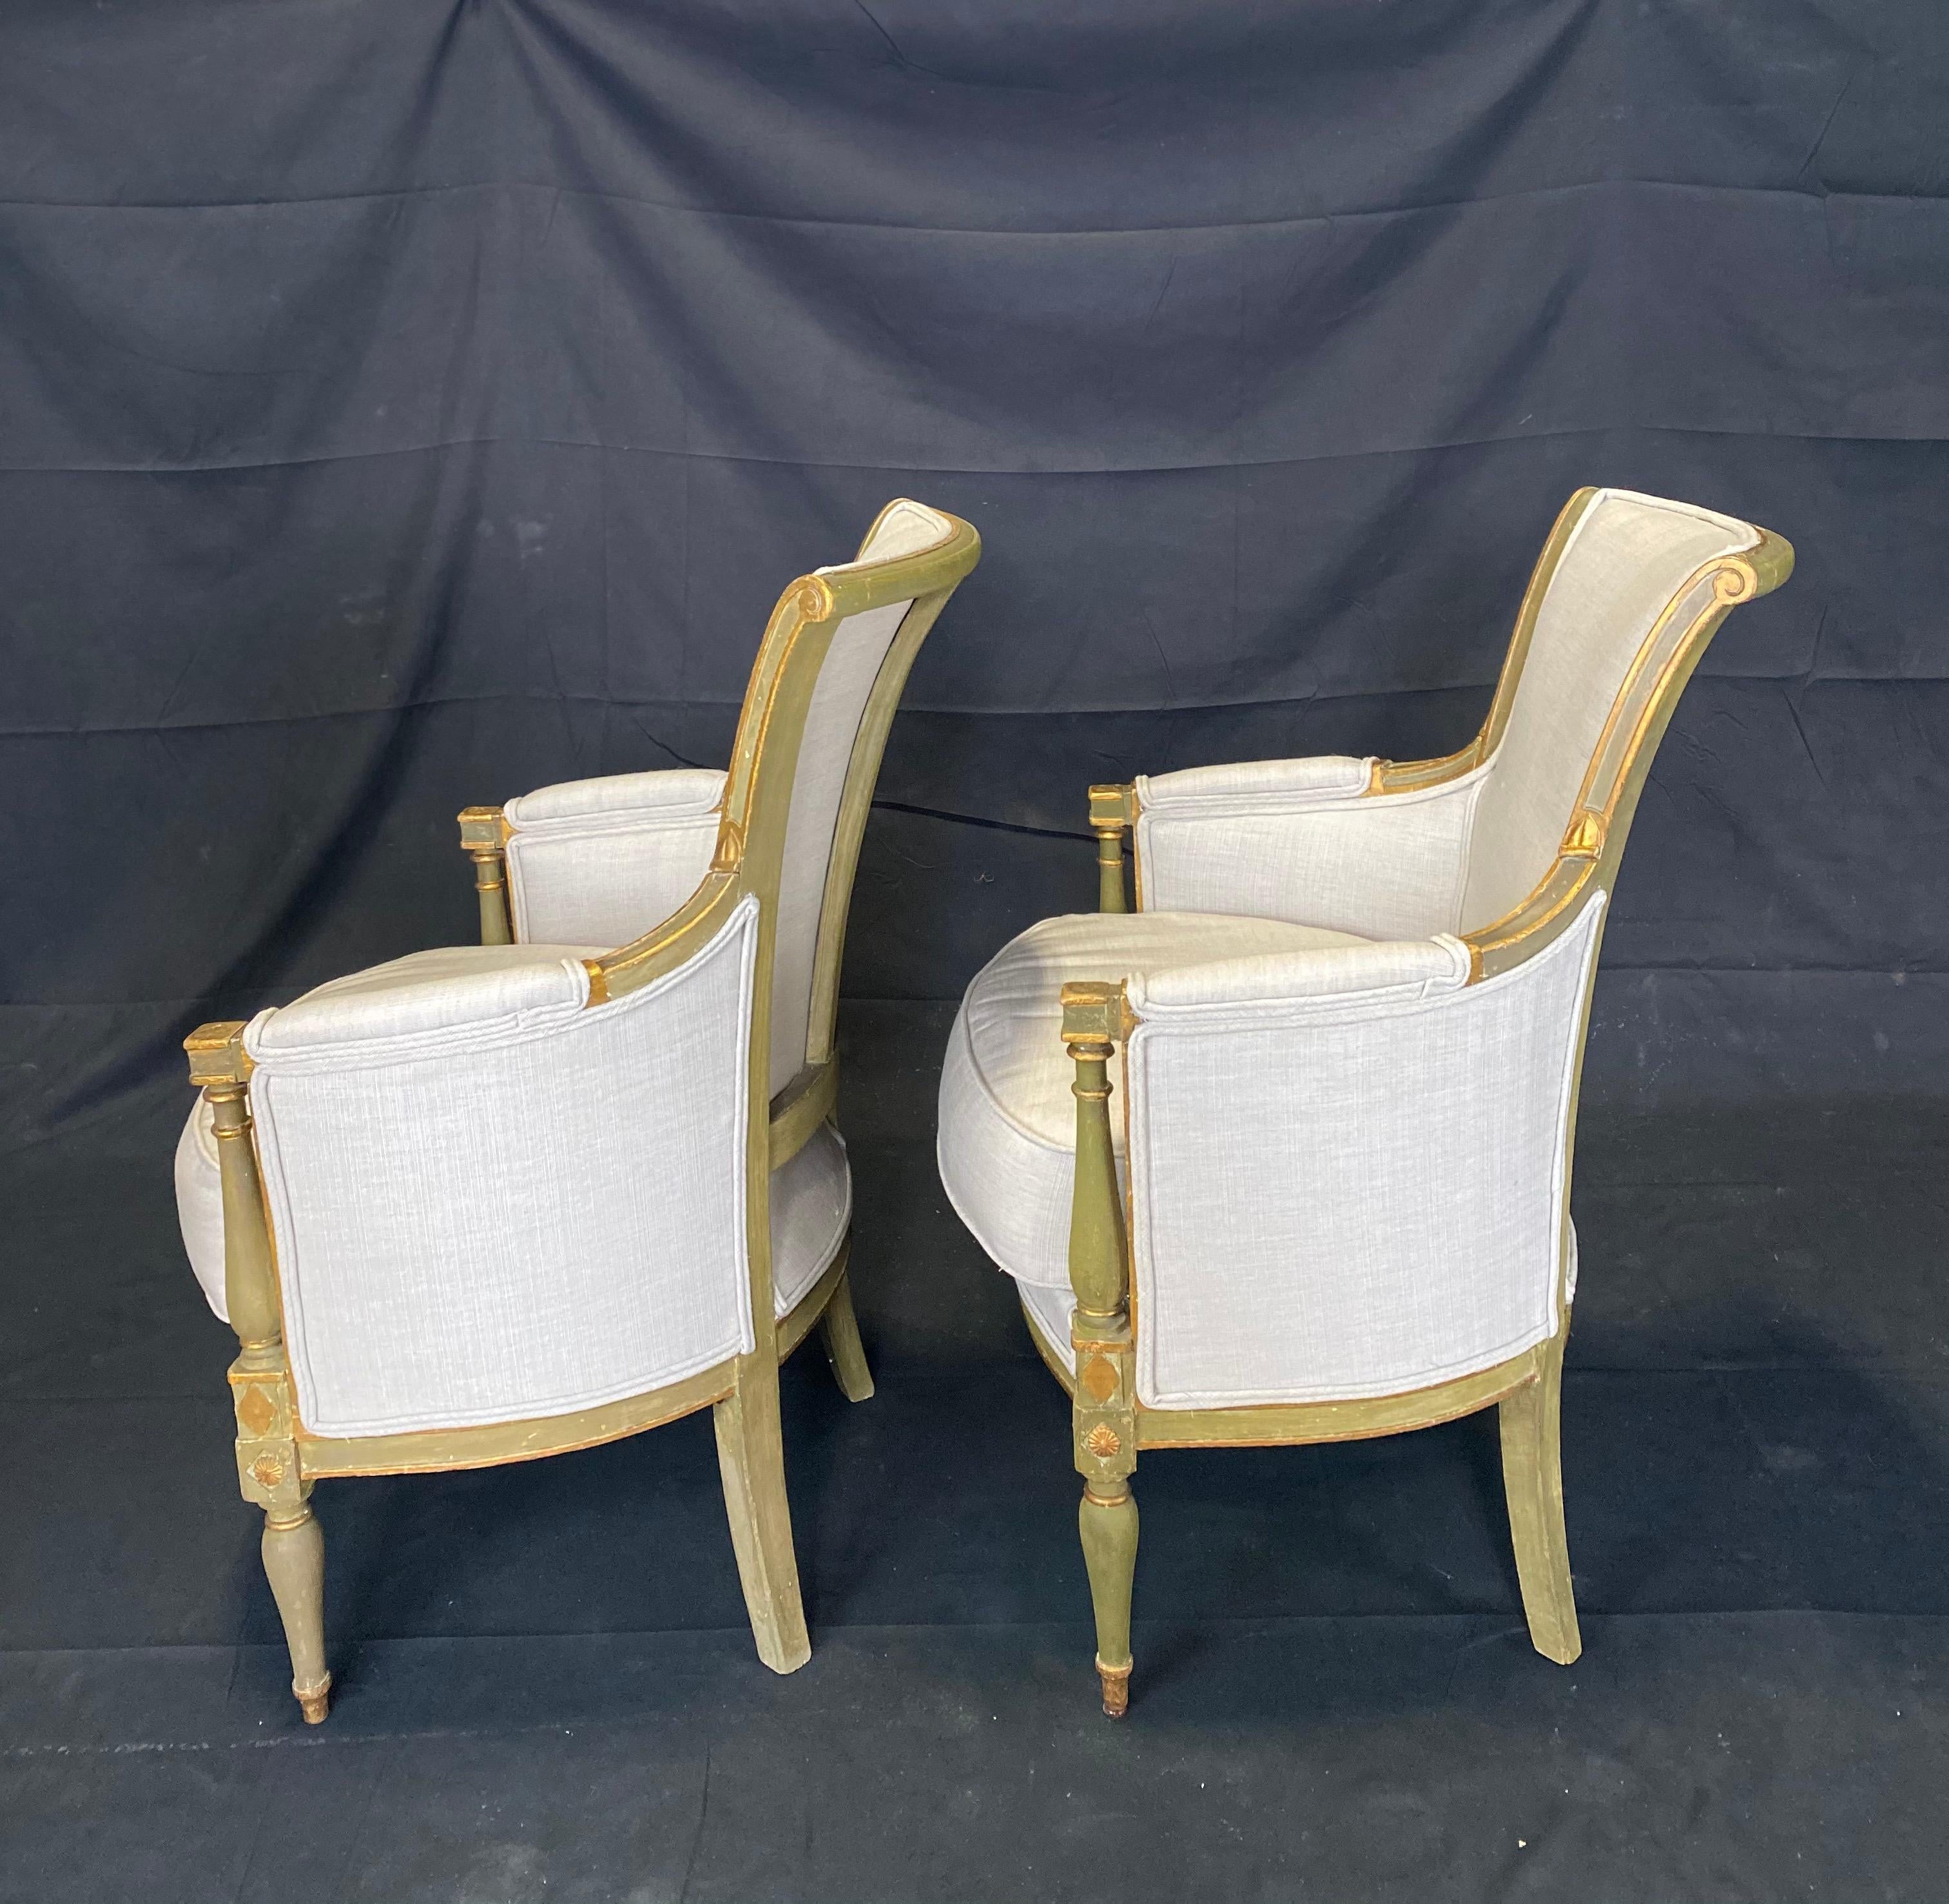 Pair of Delectable Early 19th Century Painted Neoclassical Armchair Bergères In Good Condition For Sale In Hopewell, NJ